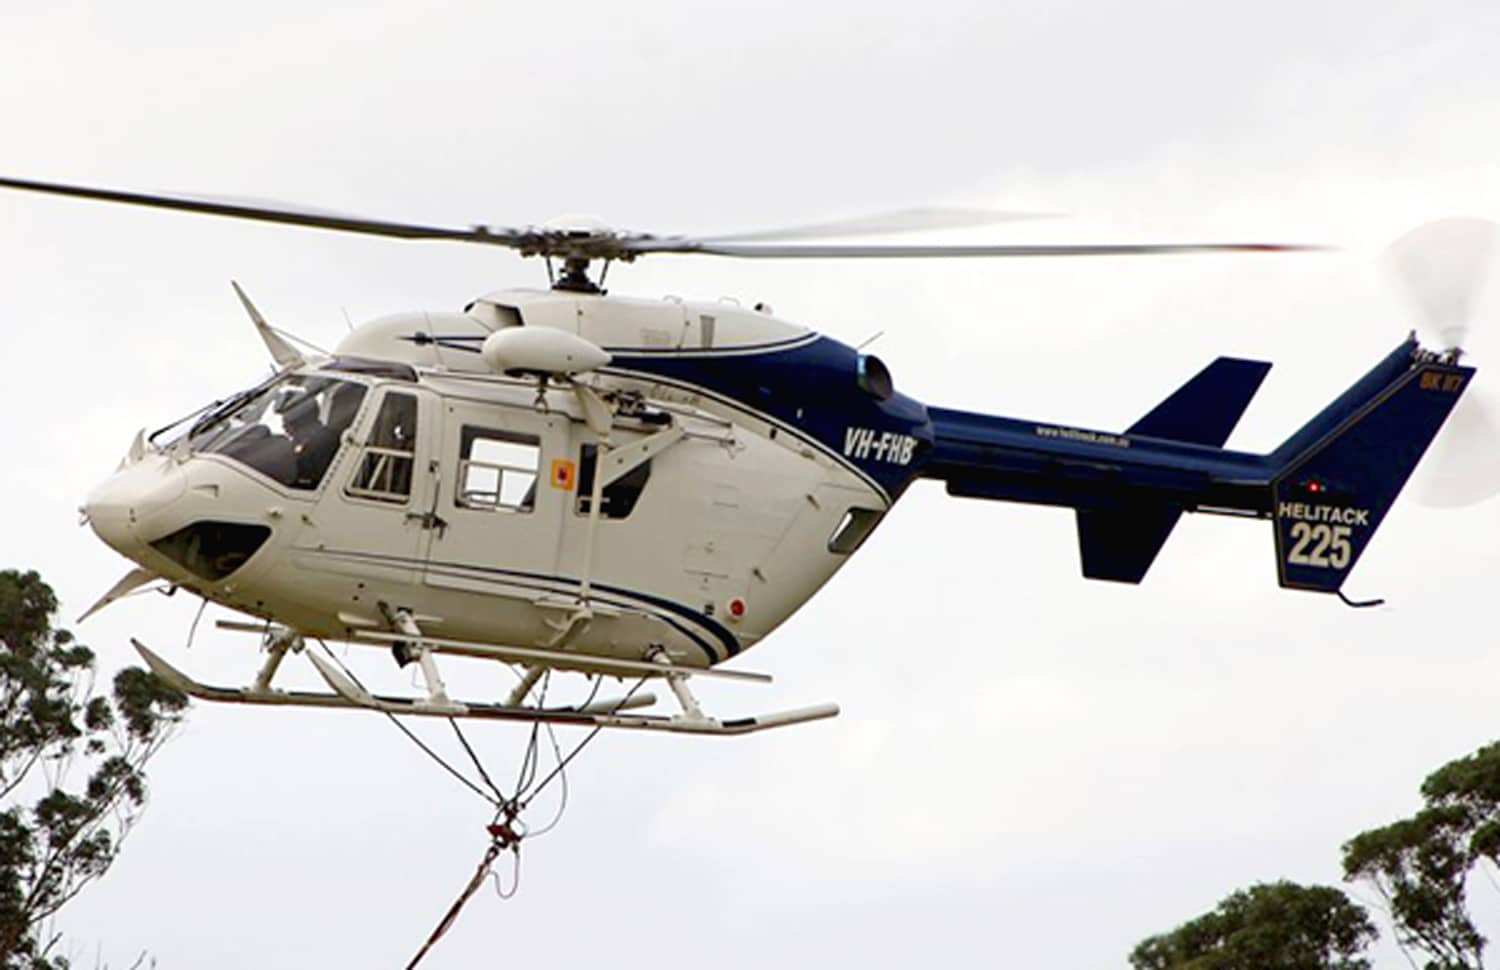 Helitreck Helicopters Fleet VH-FHB